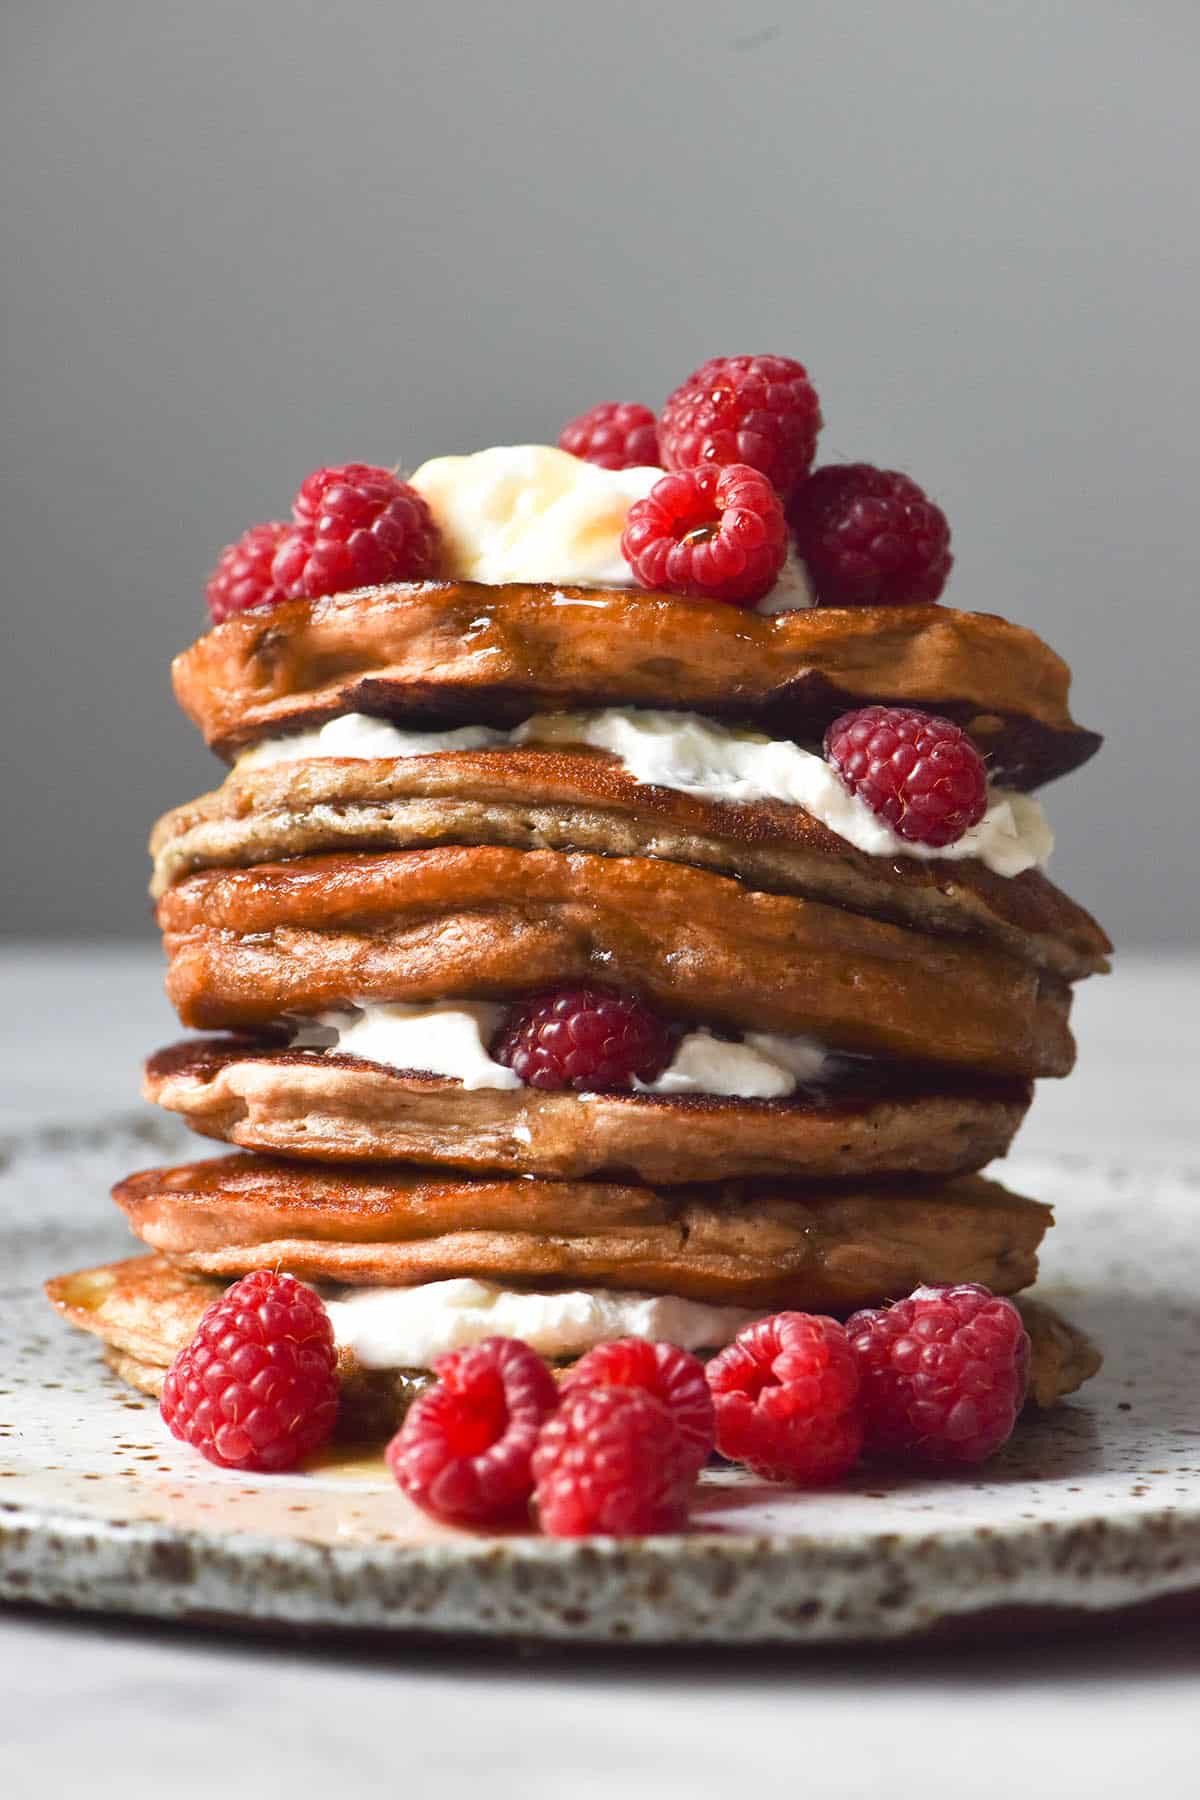 A side on view of a stack of vegan protein pancakes stuffed with yoghurt and raspberries and drizzled with maple syrup. The pancakes sit on a white speckled ceramic plate against a white backdrop